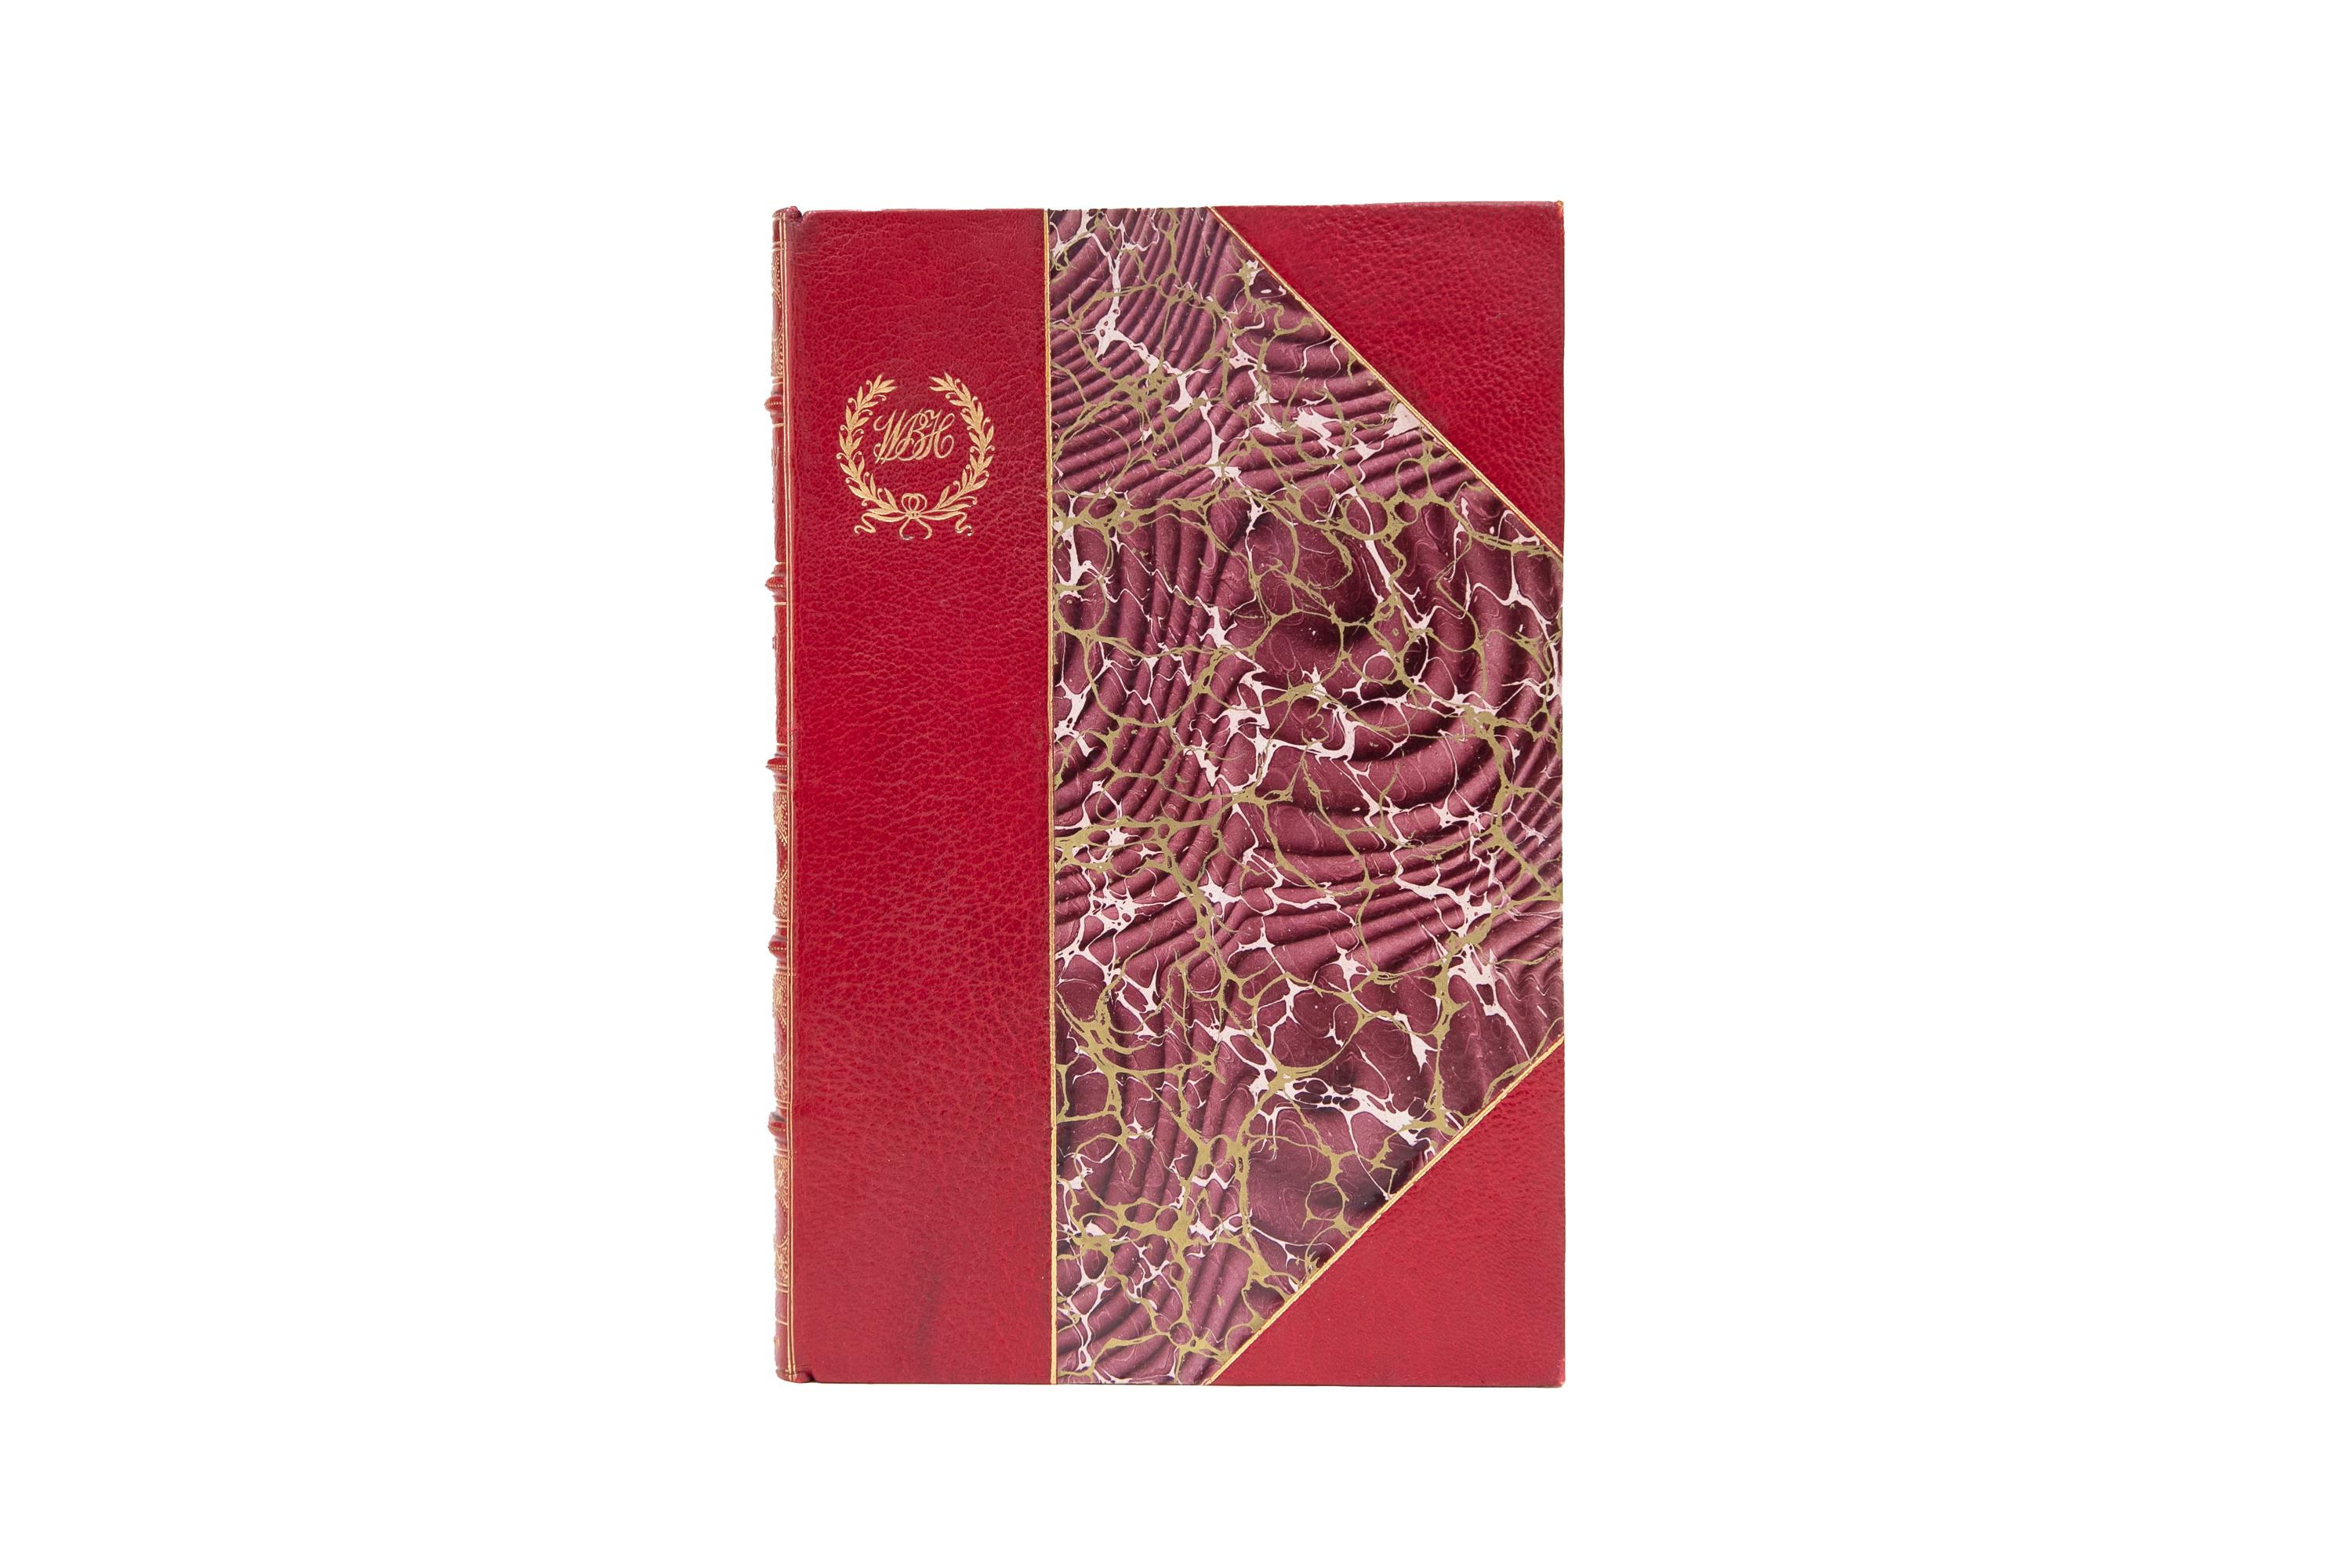 48 Volumes. Sir Walter Scott, The Waverley Novels. Connoisseur Edition. Bound in 3/4 red morocco and marbled boards, bordered in gilt-tooling. Raised band spines with ornate gilt-tooled detailing. Top edges gilt with marbled endpapers. Introduction